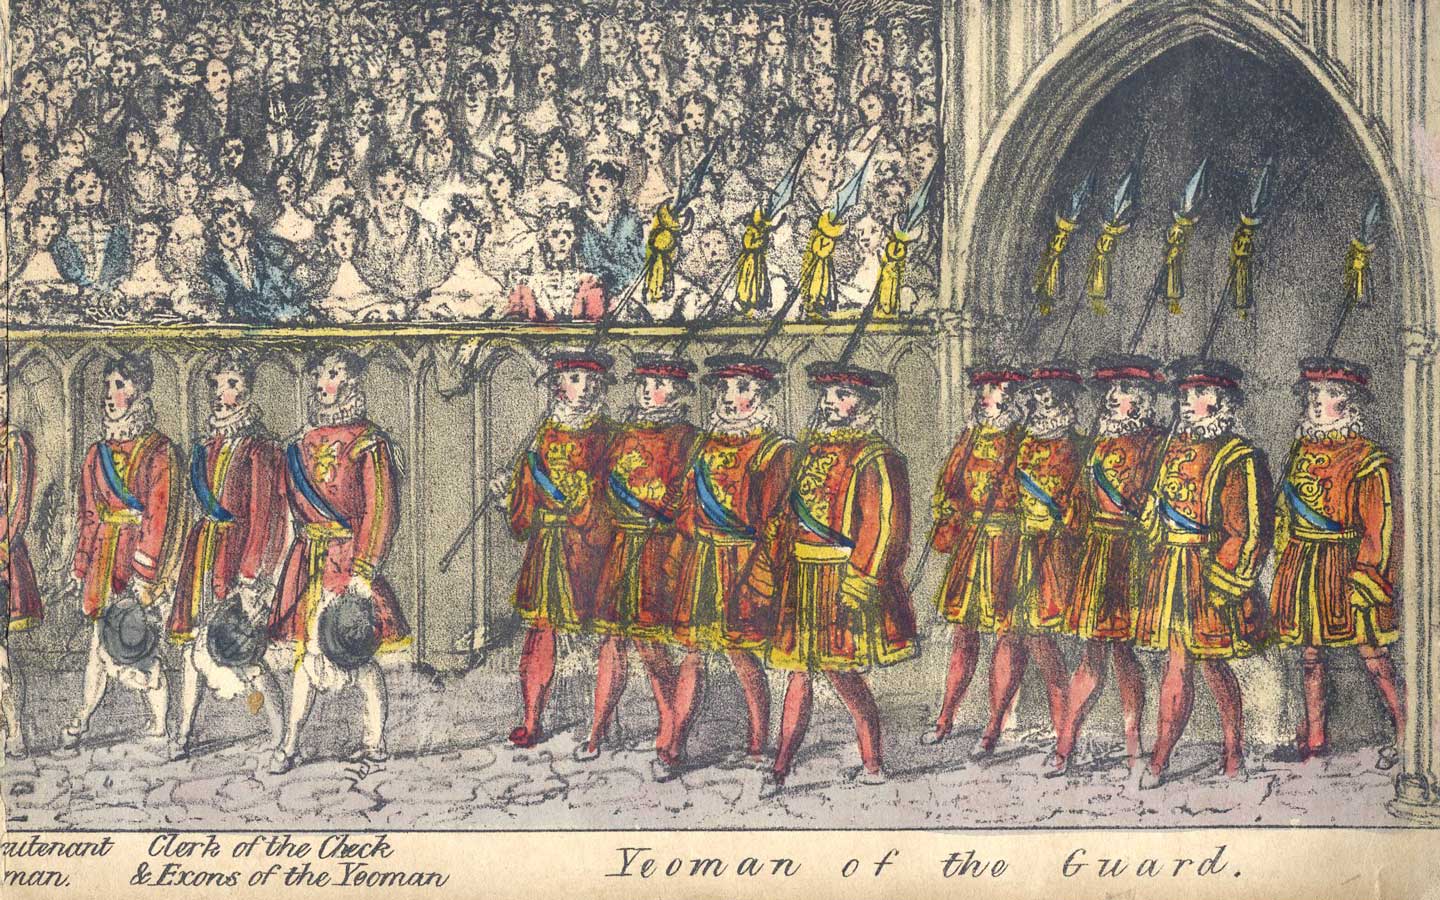 Images of the King’s Guard in Robins's Panoramic Representation of the Queen's Coronation